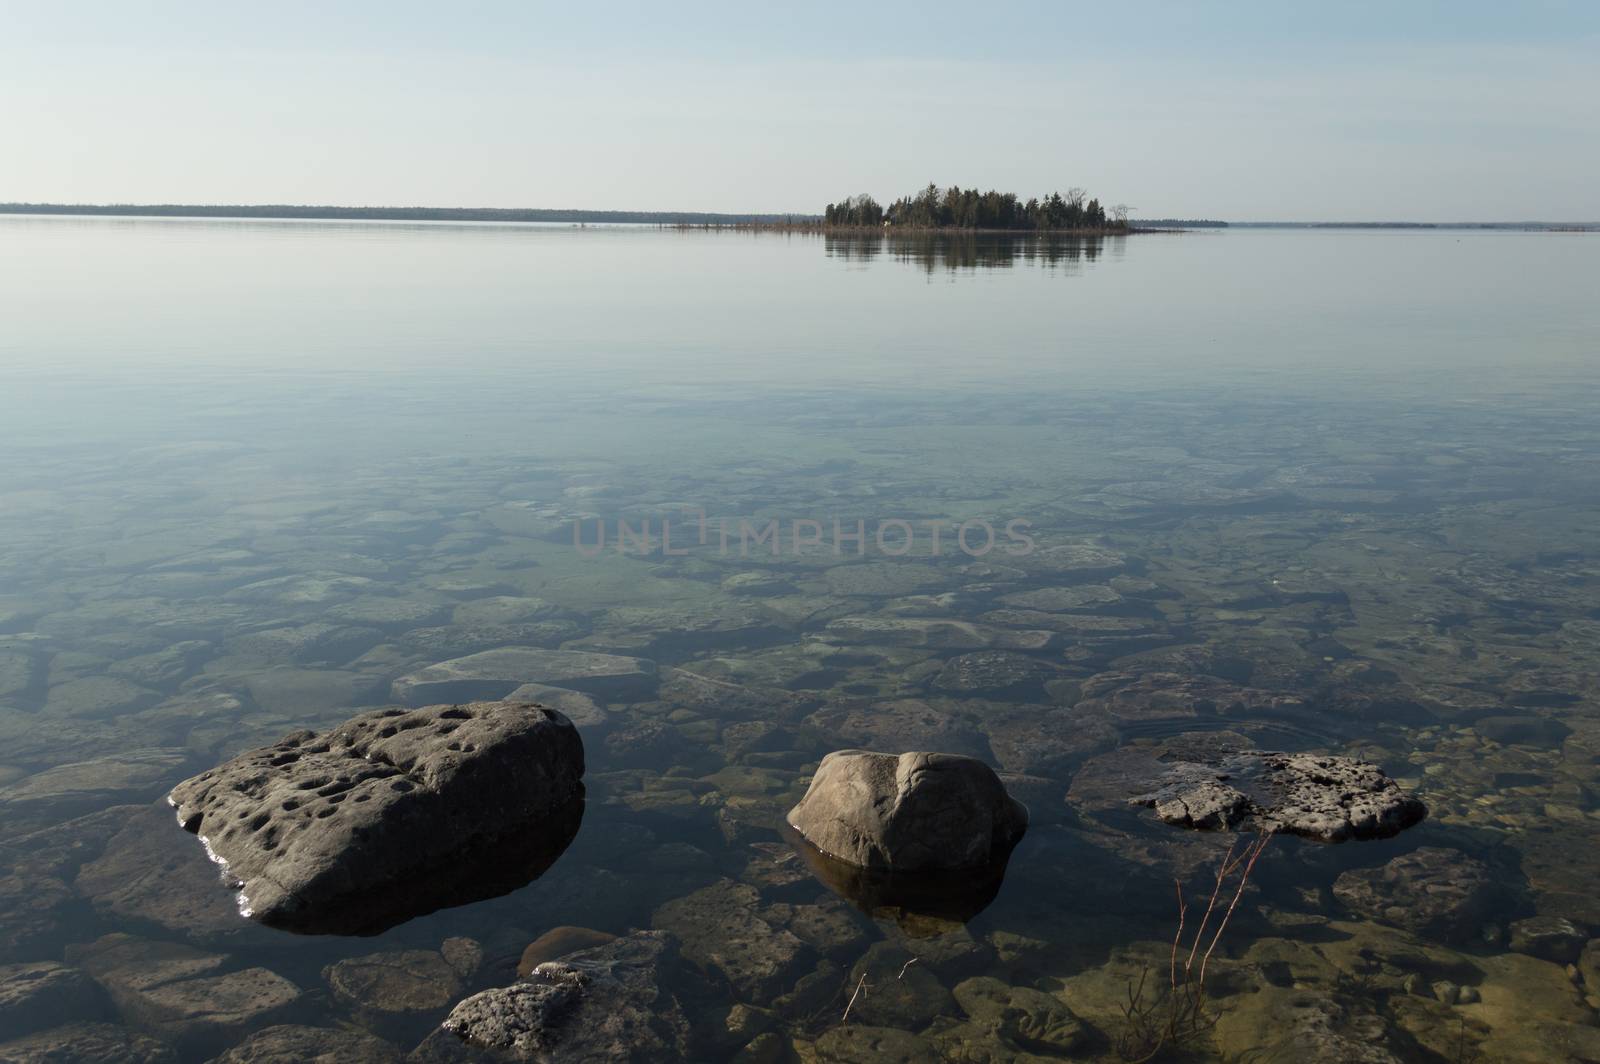 Dead calm afternoon image of shallow and clear lake huron water and limestone rocks along theshoreline.  A small tree-covered island is on the horizon. Overall feeling is a calm, peaceful, tranquil, serene and wild background.